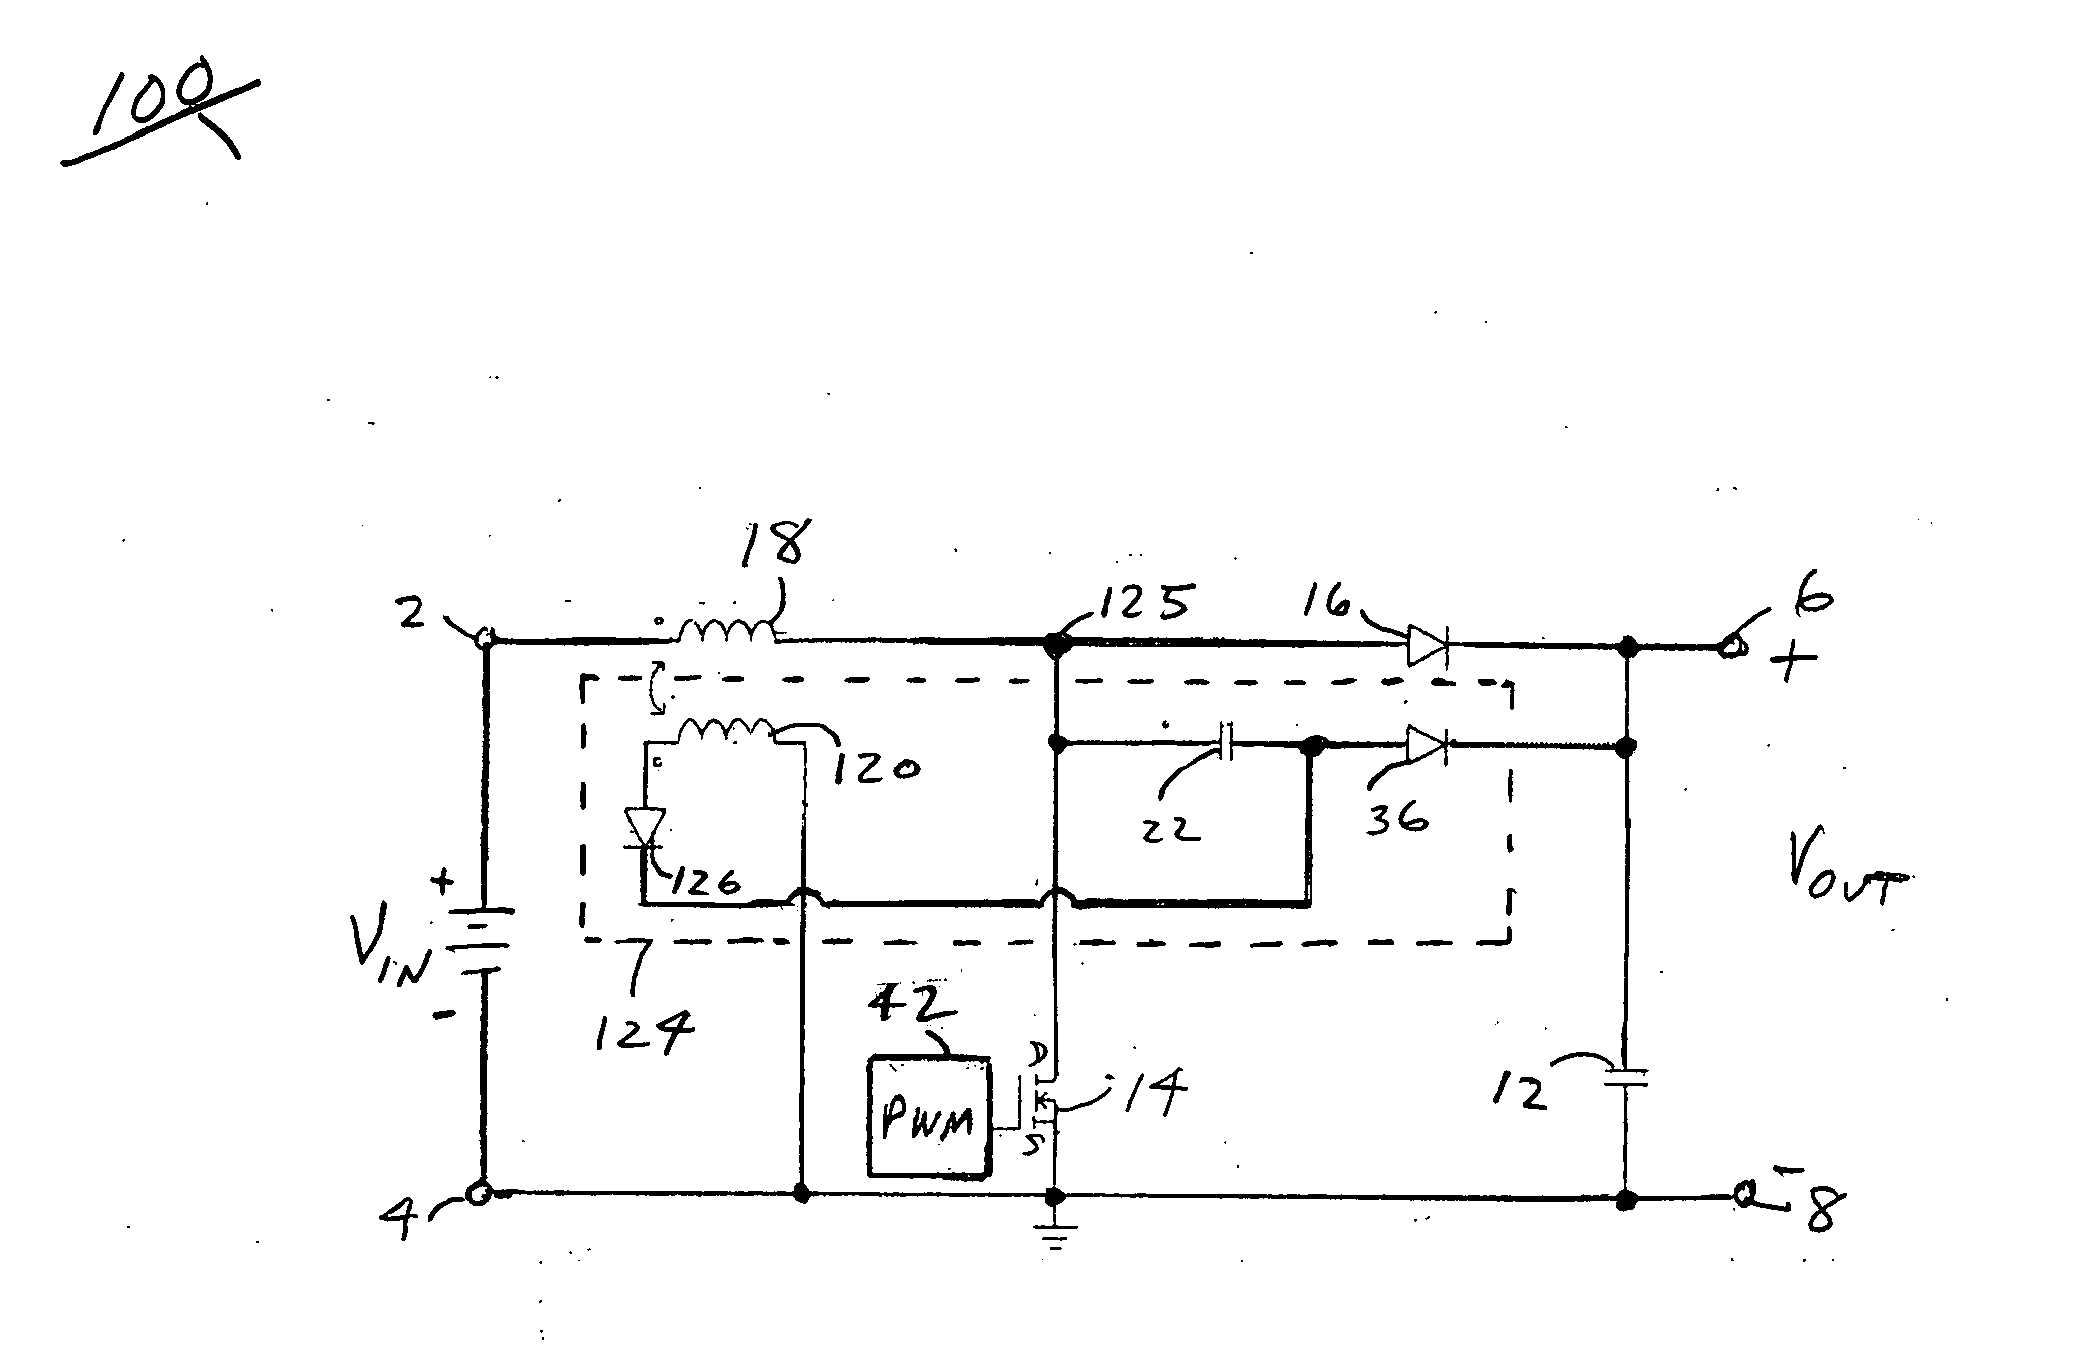 Snubber circuit for a power converter